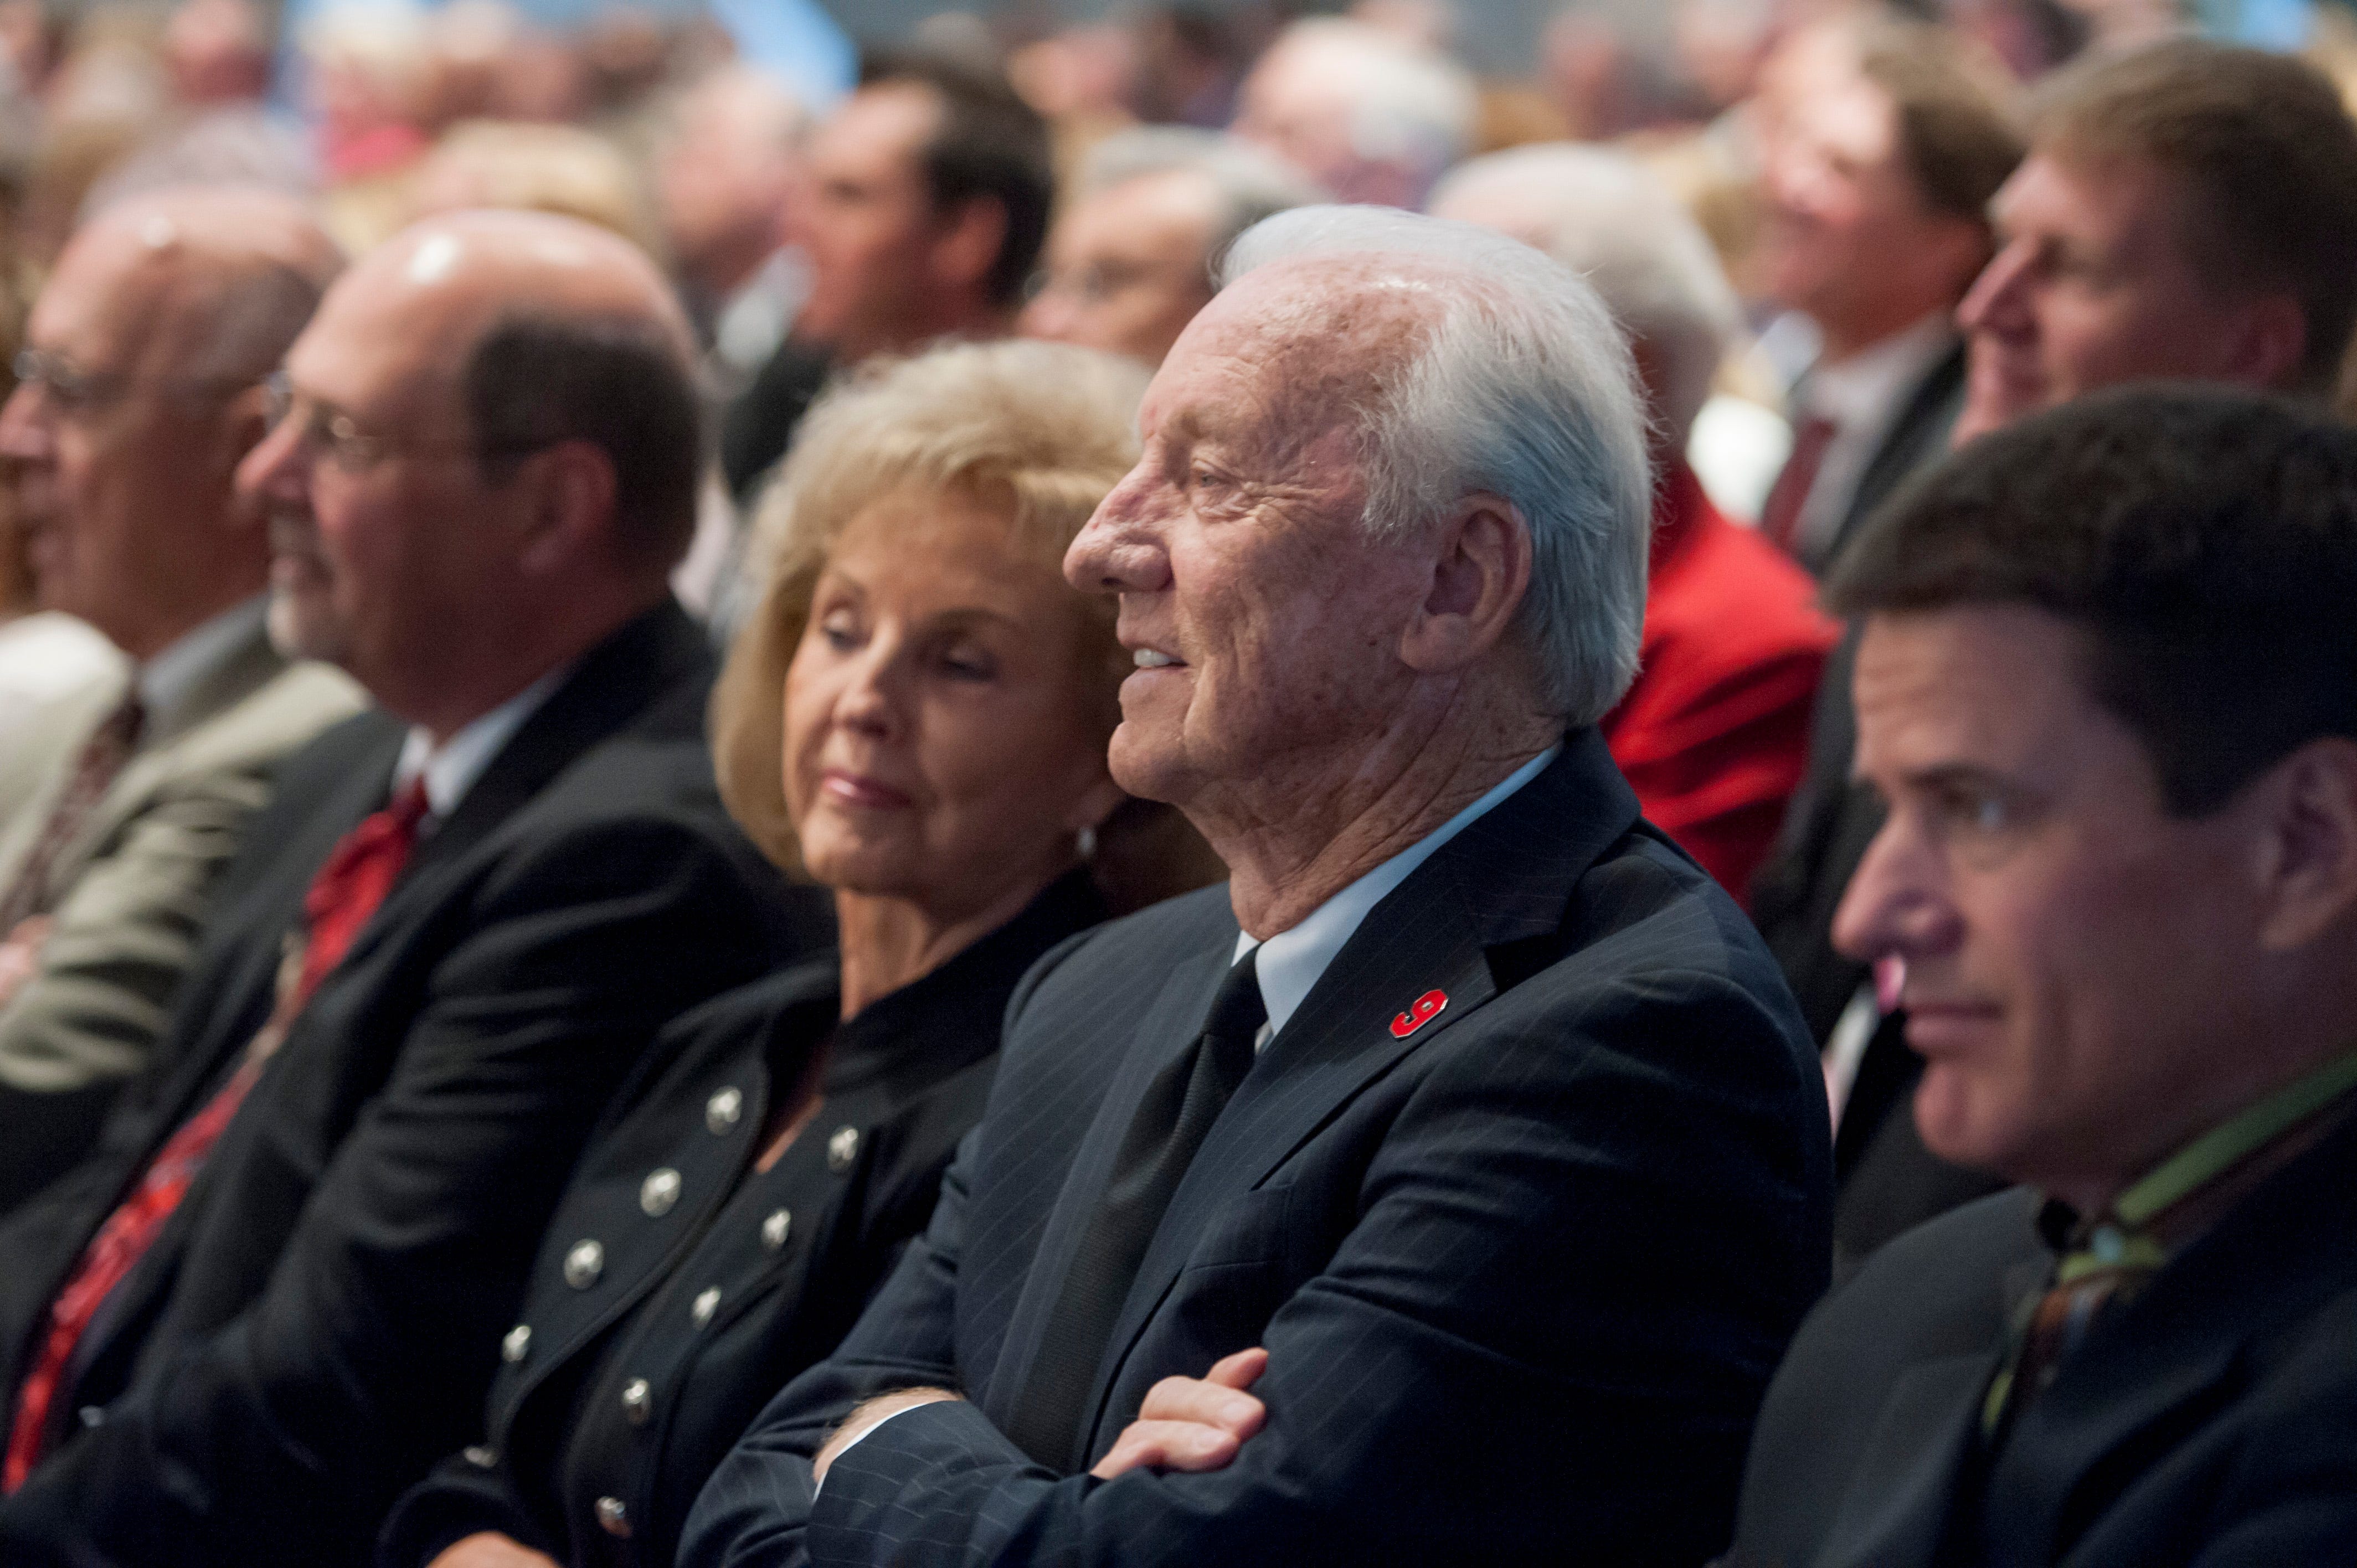 Al Kaline listens to the eulogy during the funeral service for another Detroit sports legend, Red Wings great Gordie Howe at the Cathedral of the Most Blessed Sacrament, in Detroit, June 15, 2016.